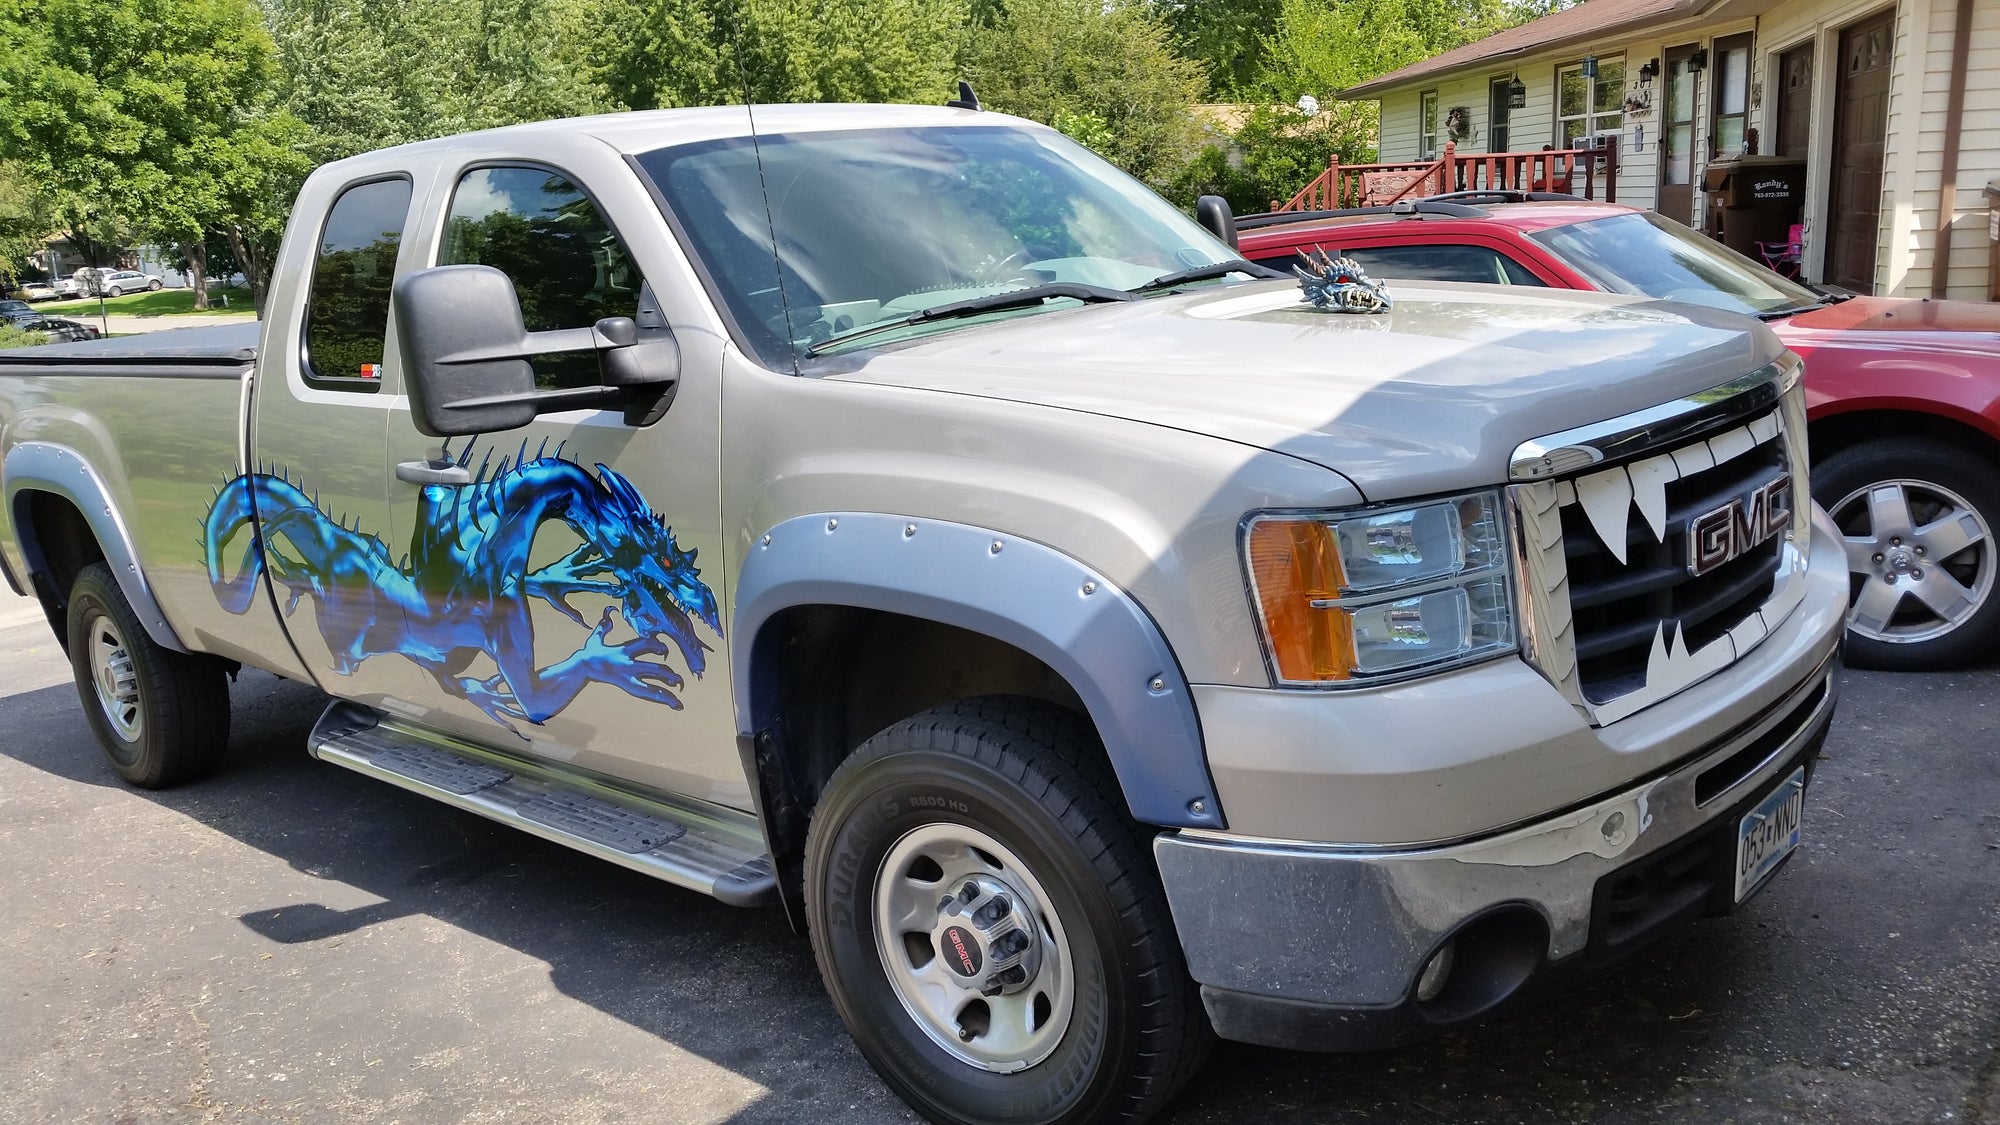 blue vinyl dragon decal on side of GMC truck